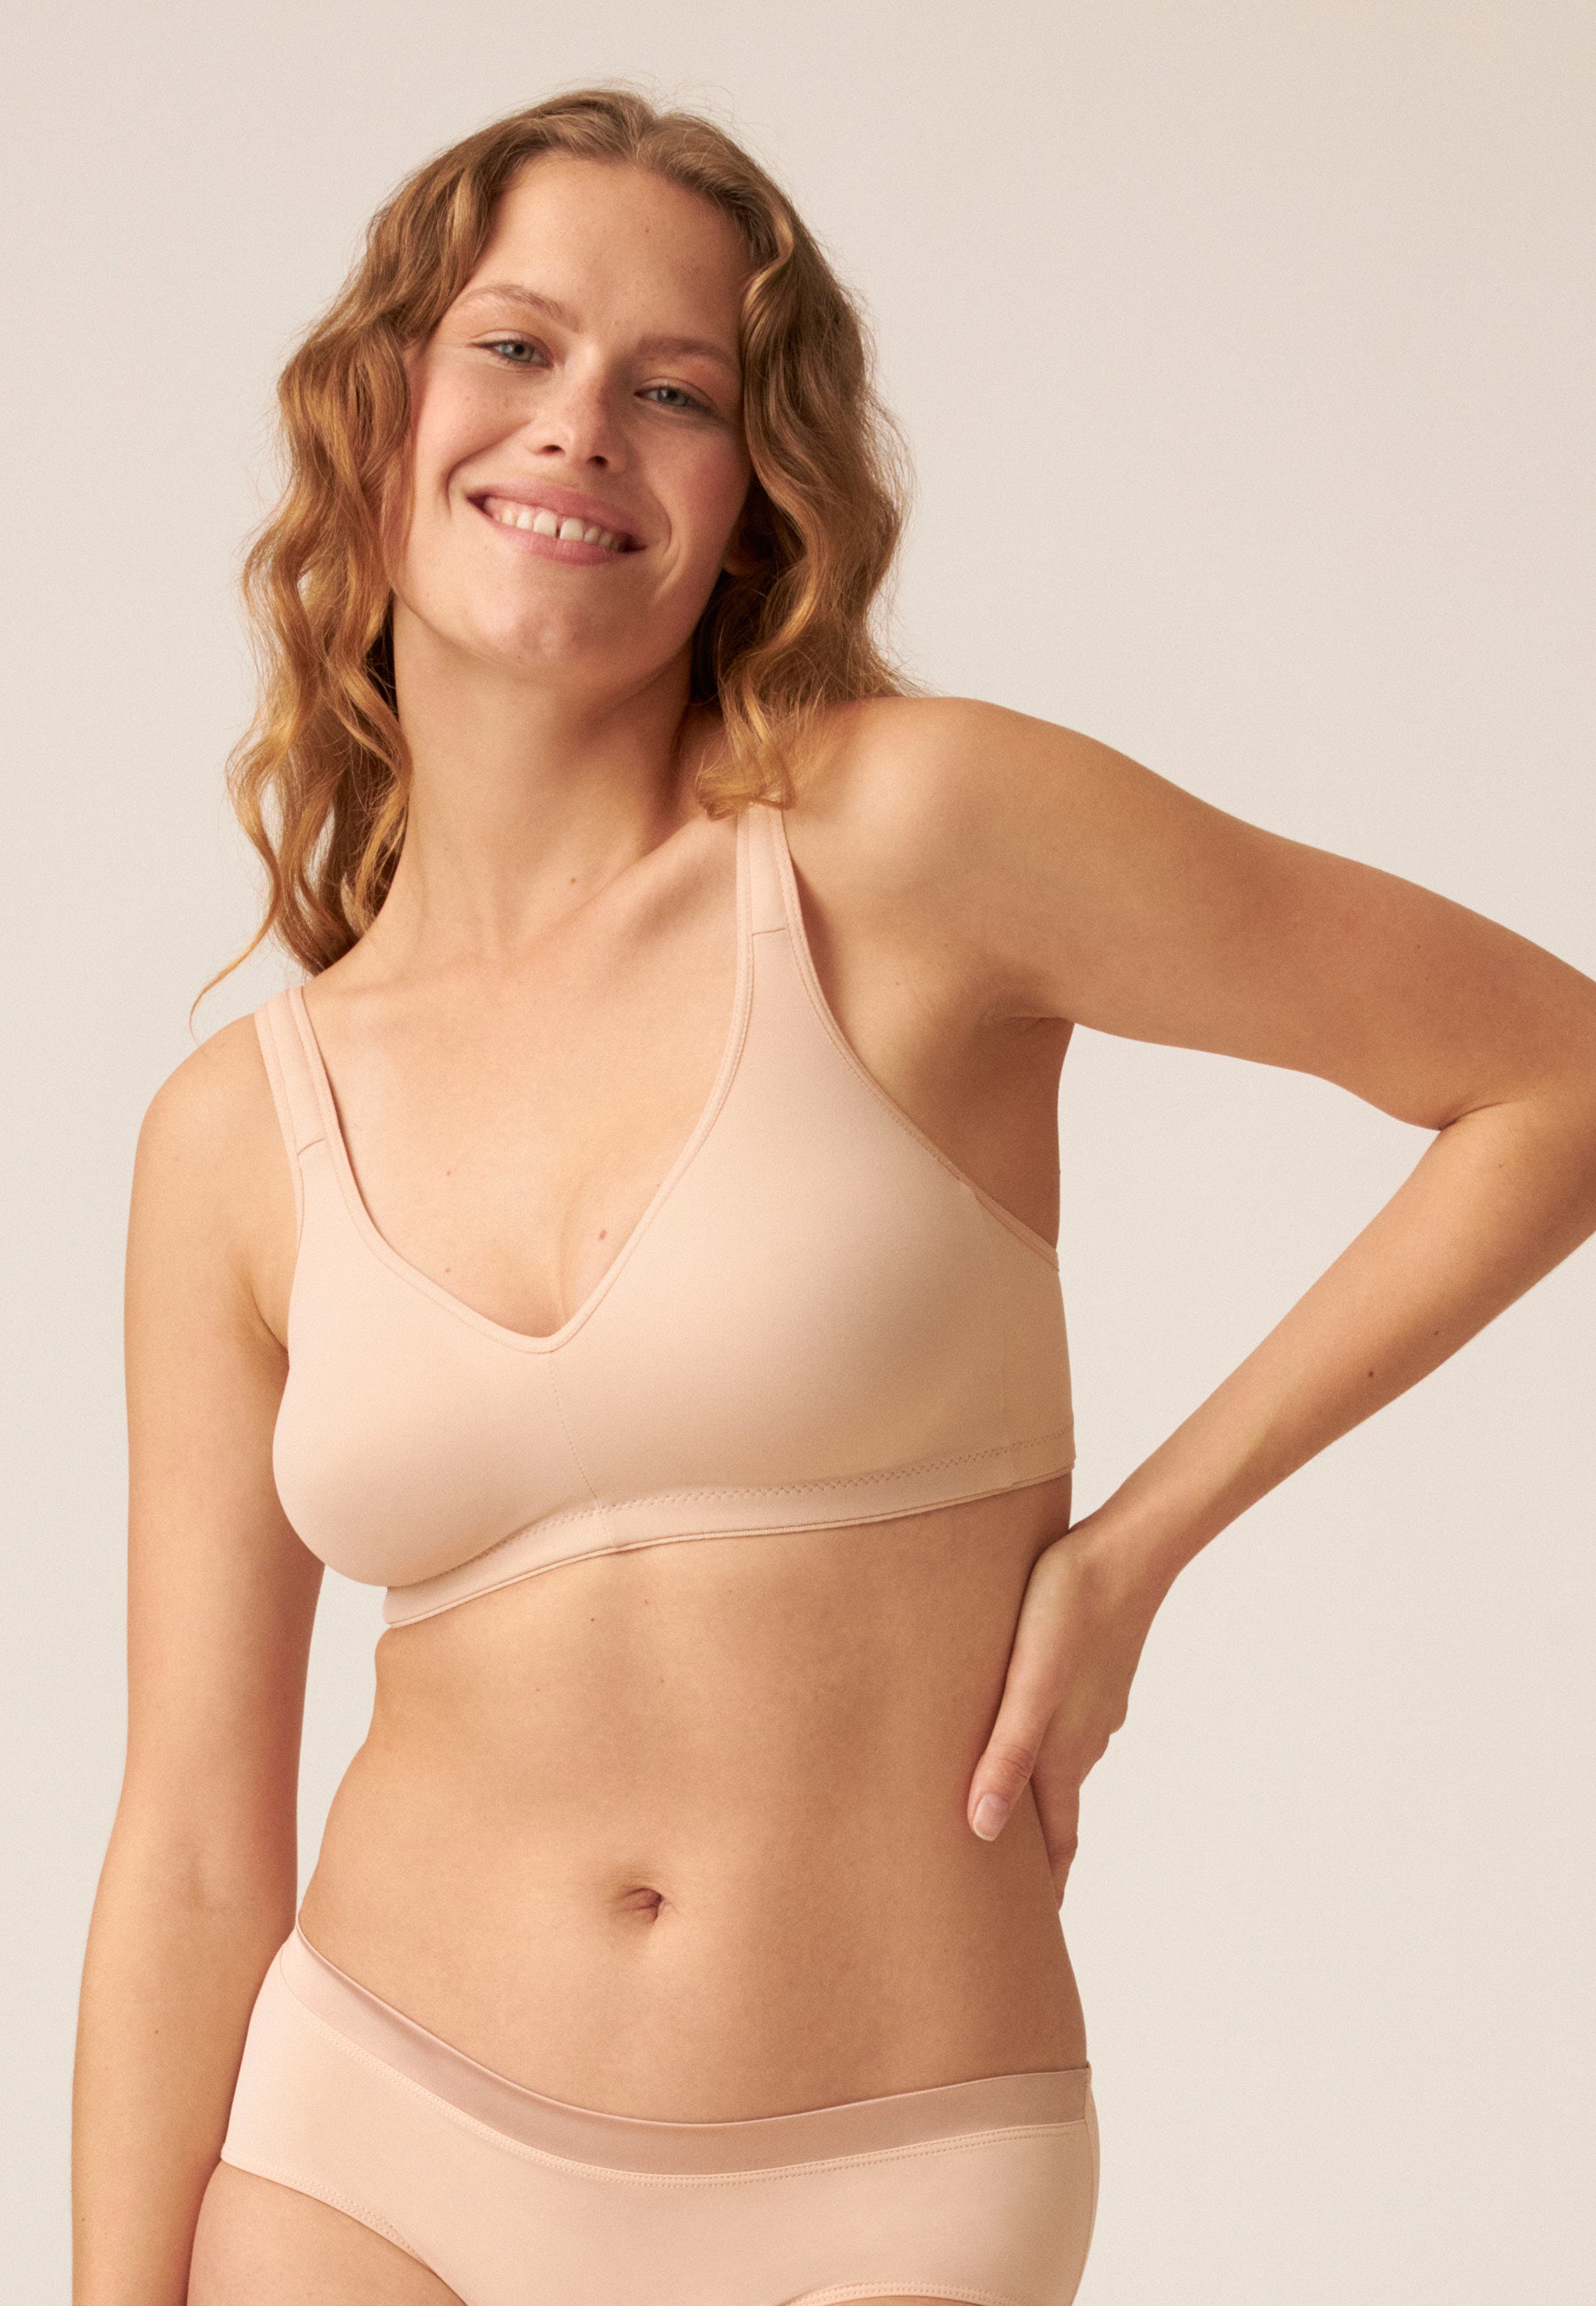 Naturana Wirefree Cotton Full Cup Bra with Lace inserts and side boning 5346